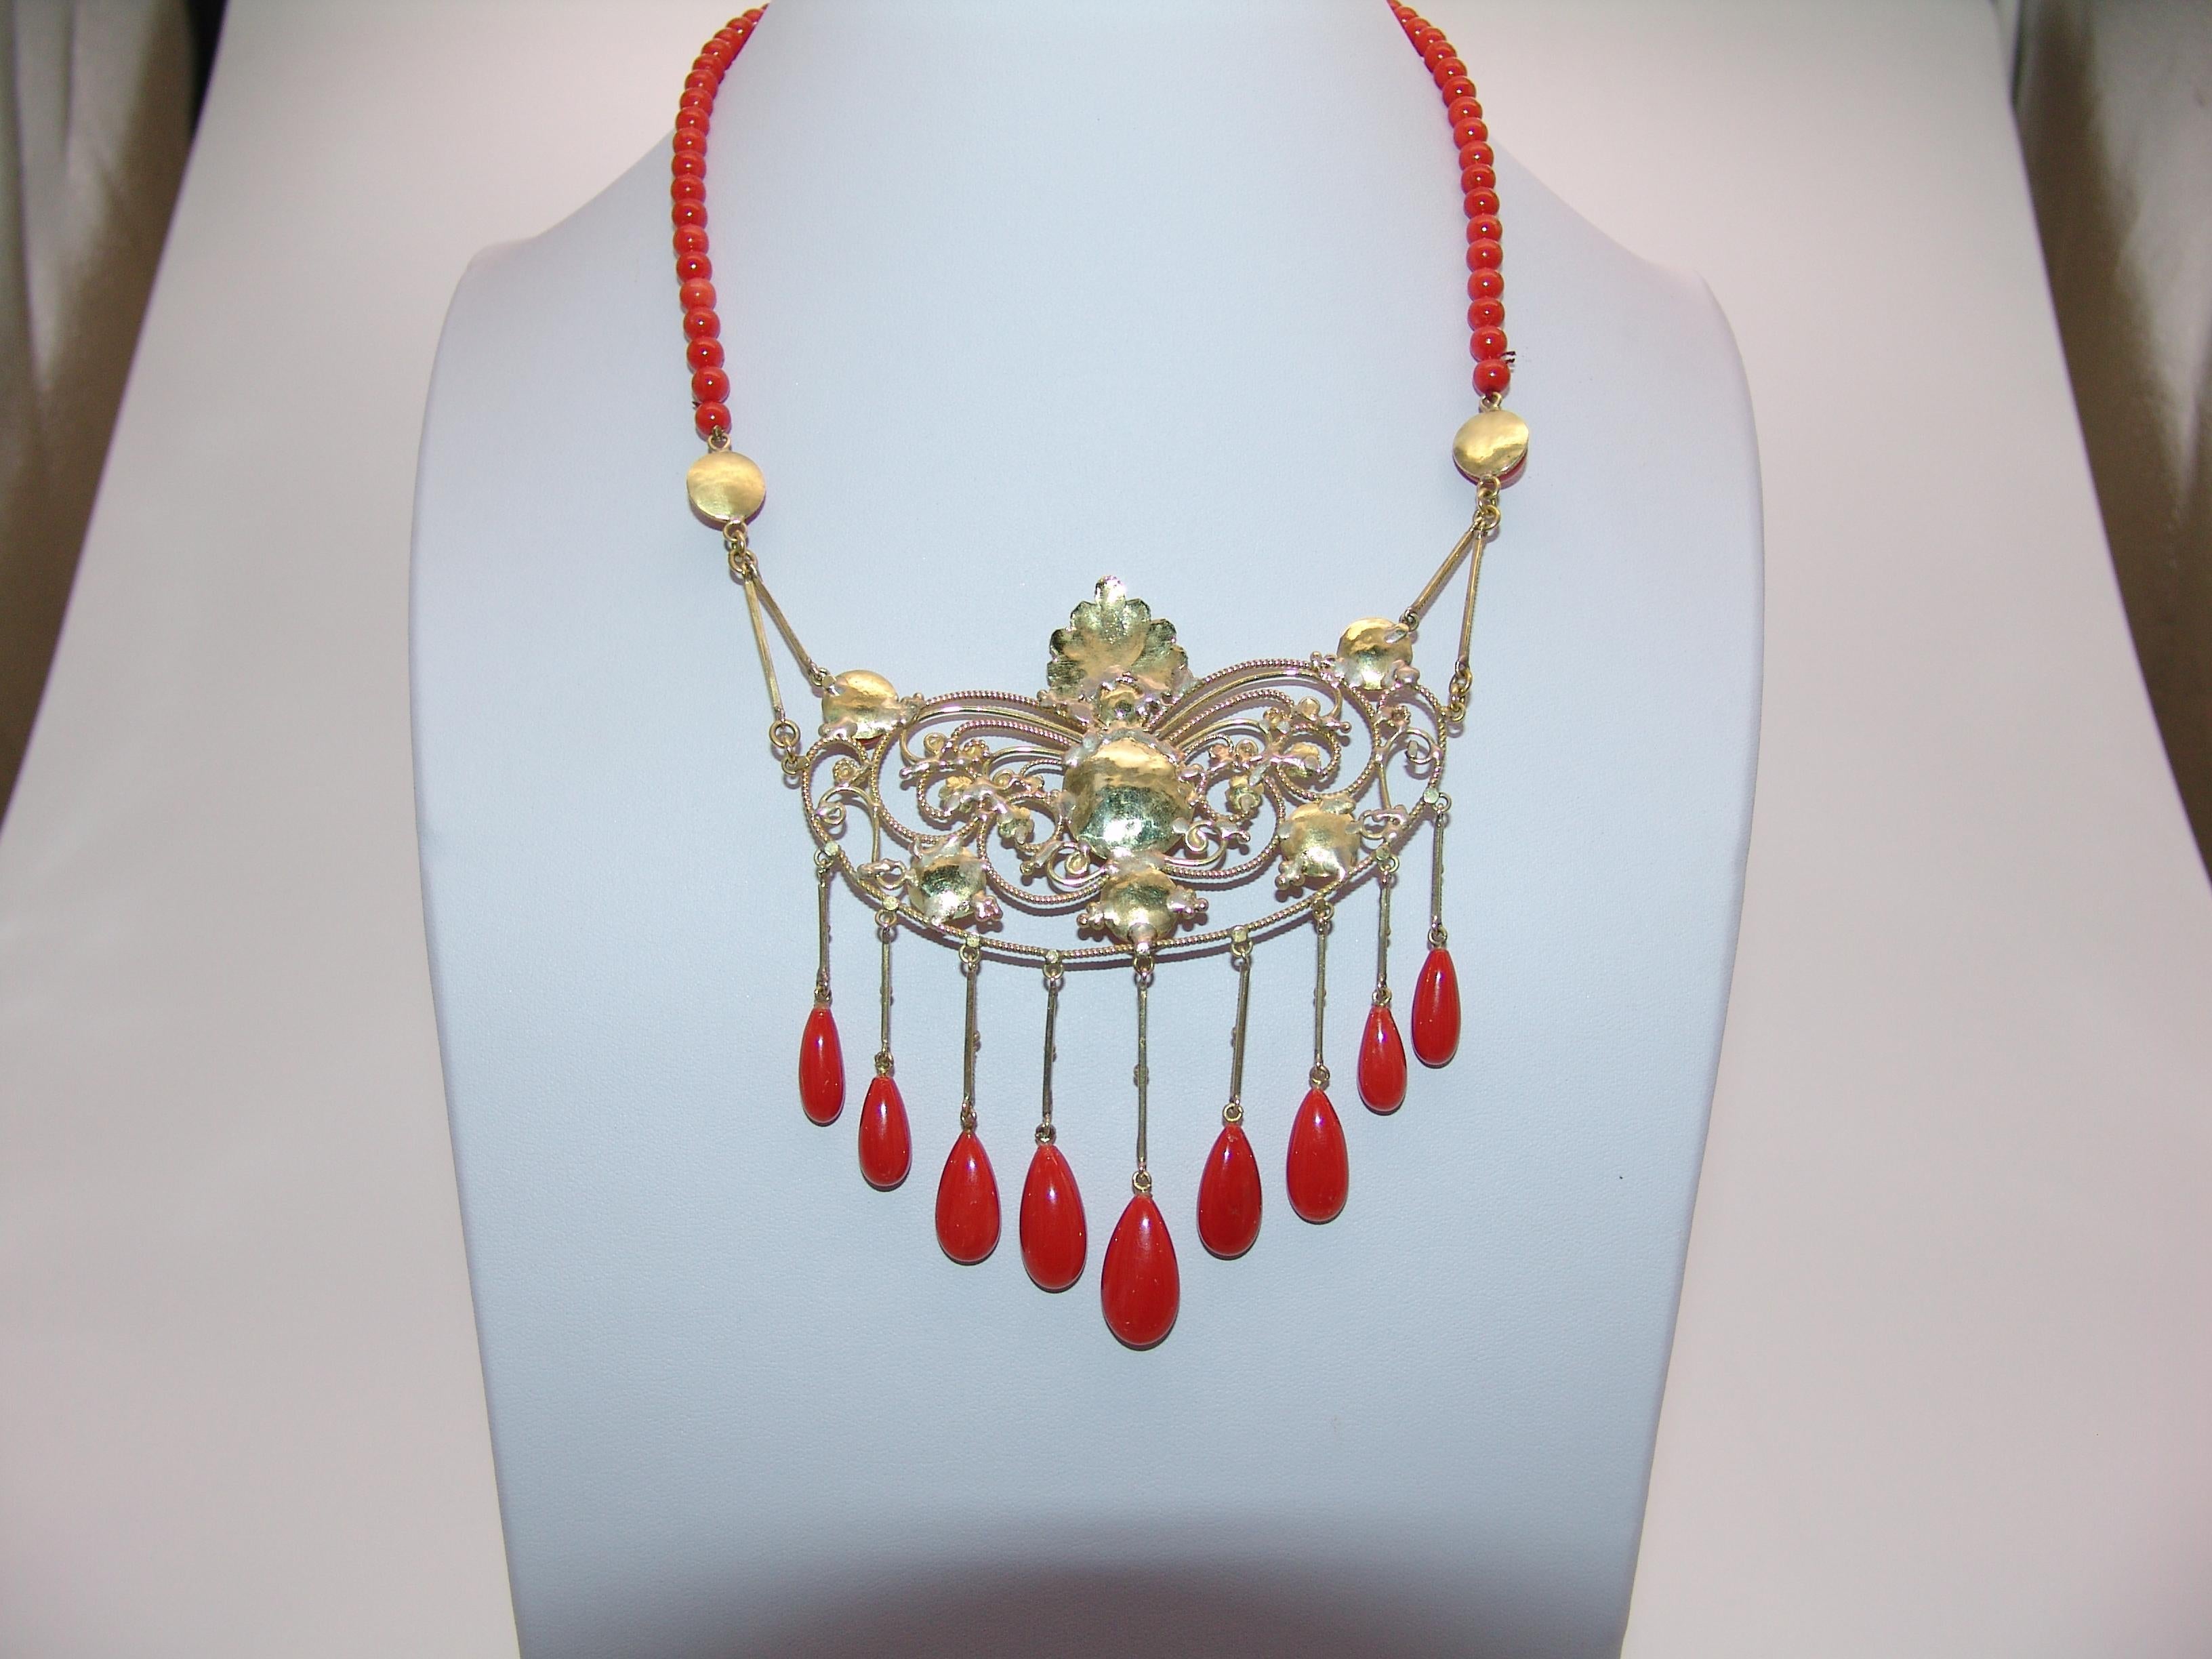 Coral and Gold Necklace with round cabochon and drops.